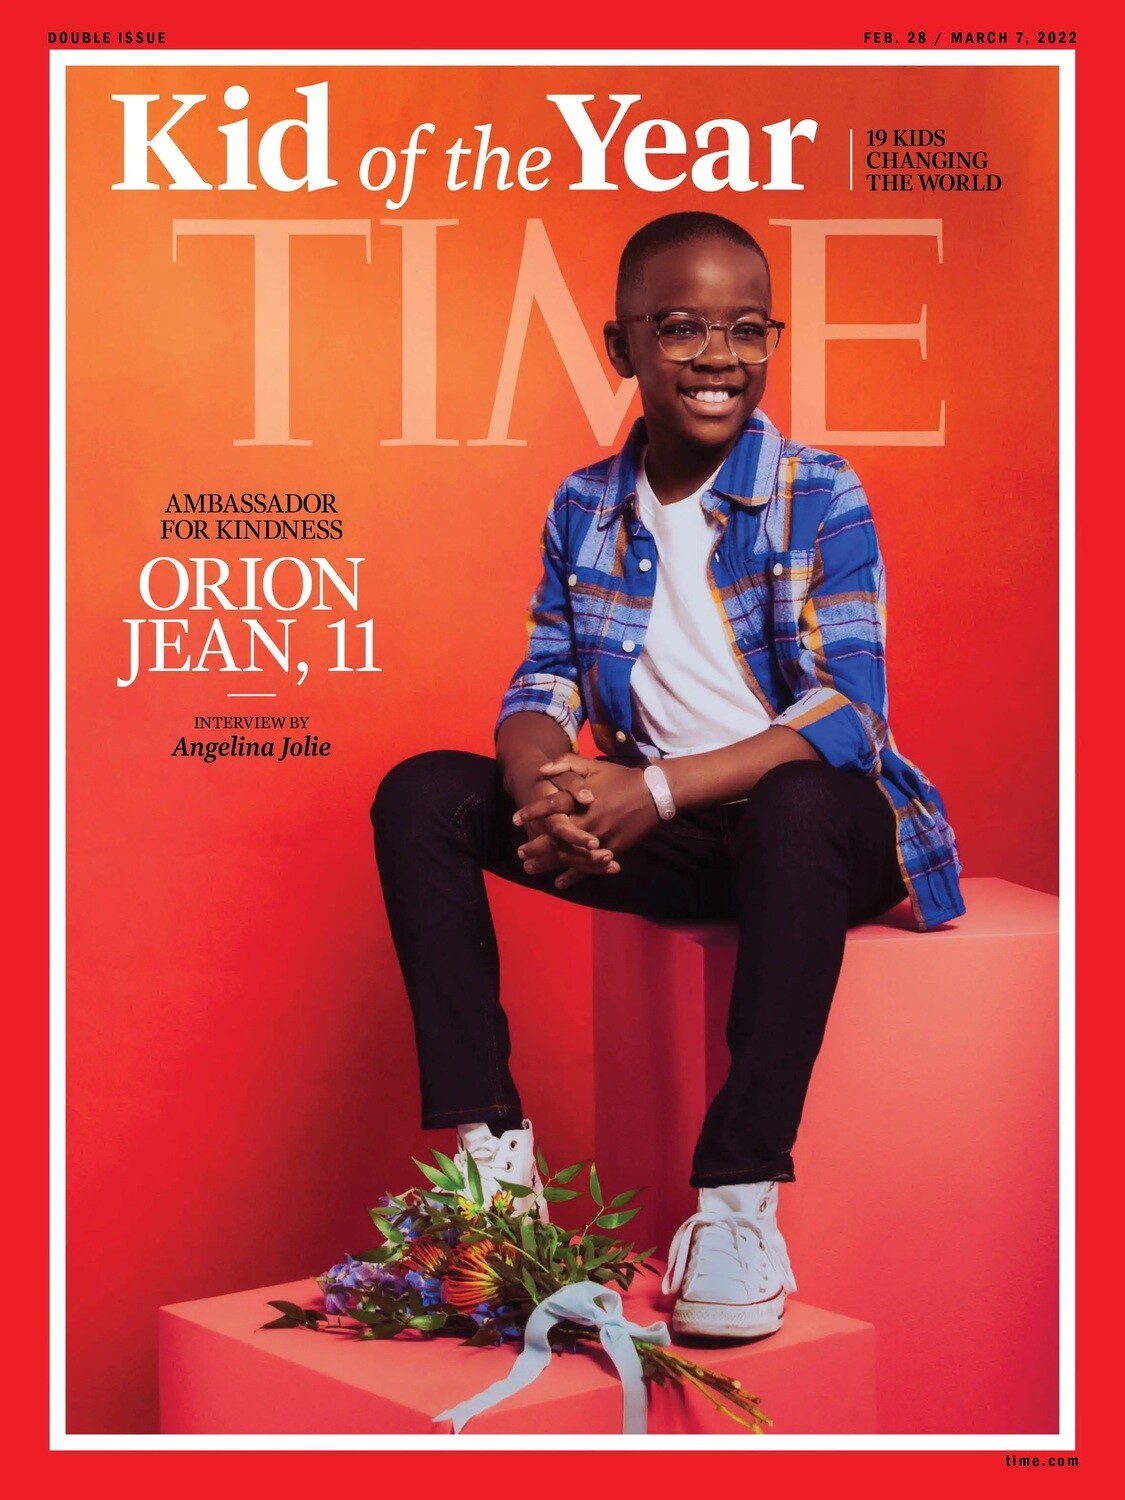 Time Magazine 2022 - 2021 Kid of the Year -Orion Jean